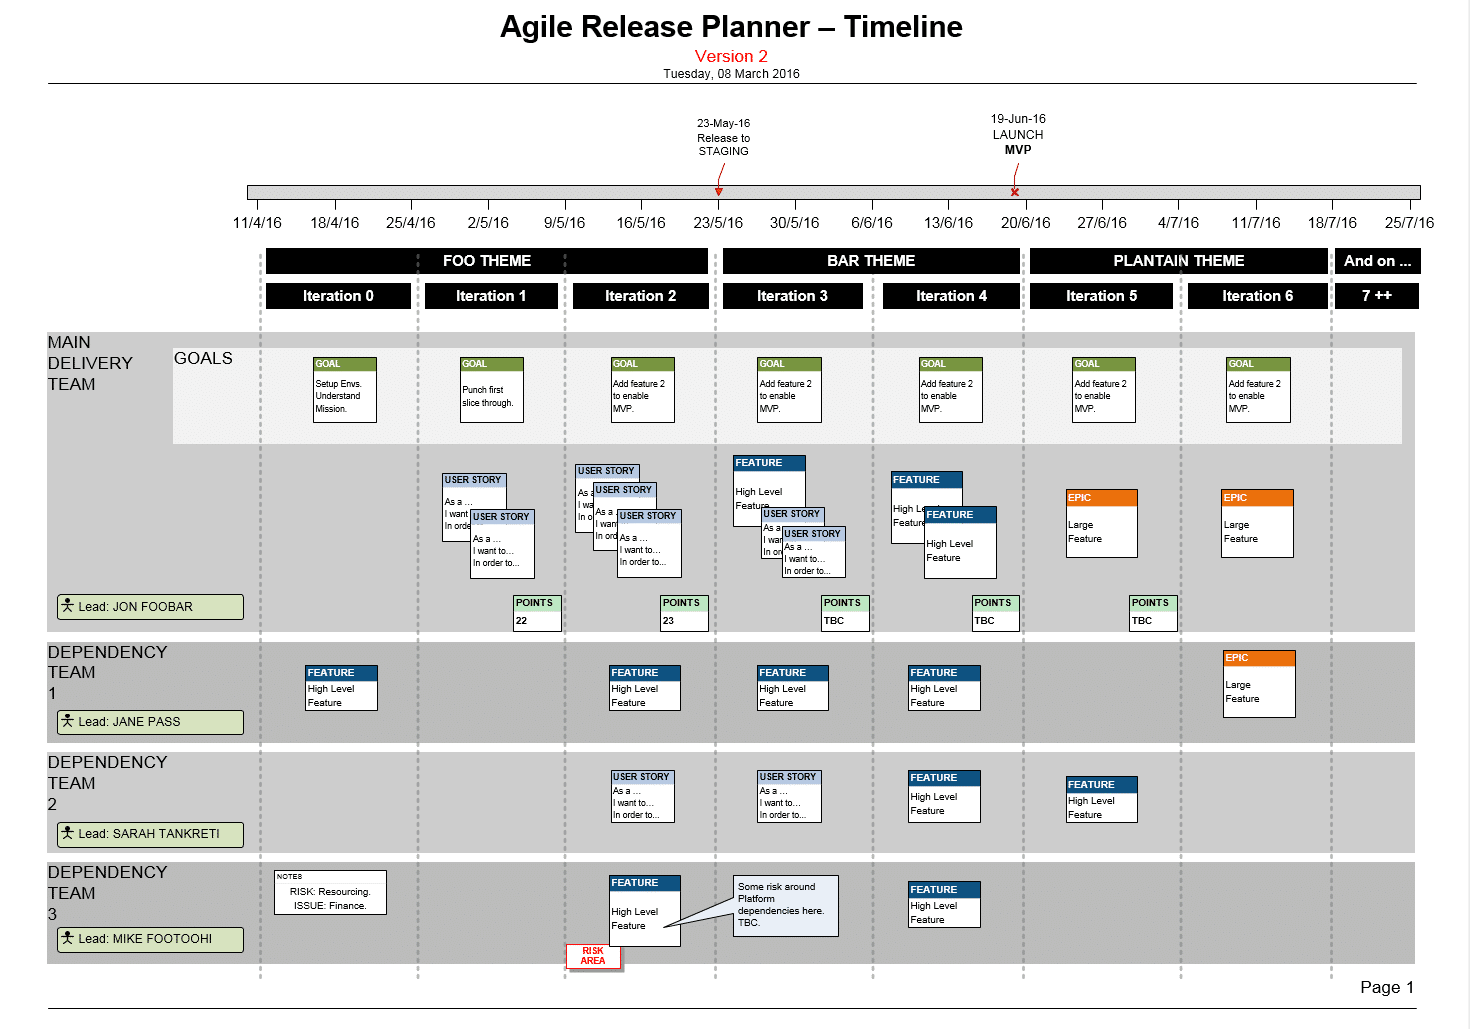 Visio Agile Release Plan for Scrum Teams Story Map & MVP